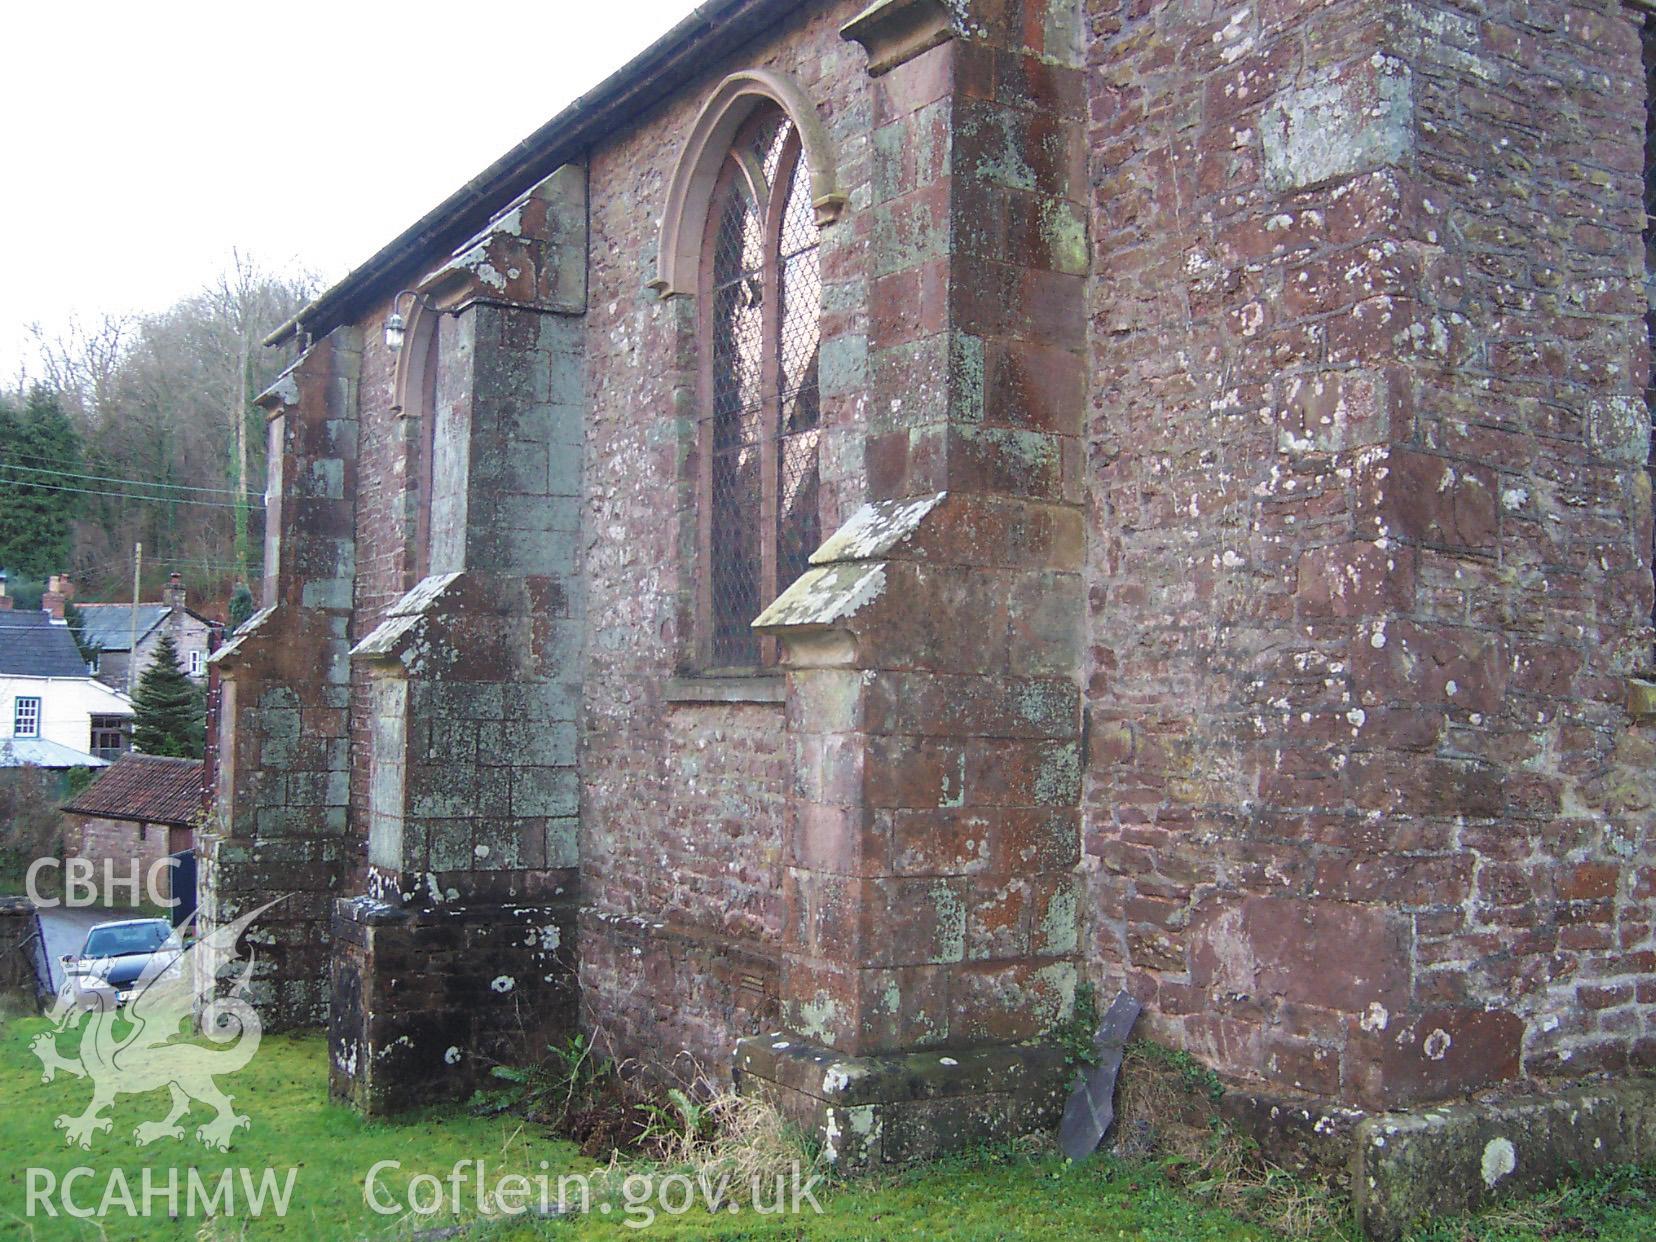 Colour digital photograph showing a side of the church exterior.